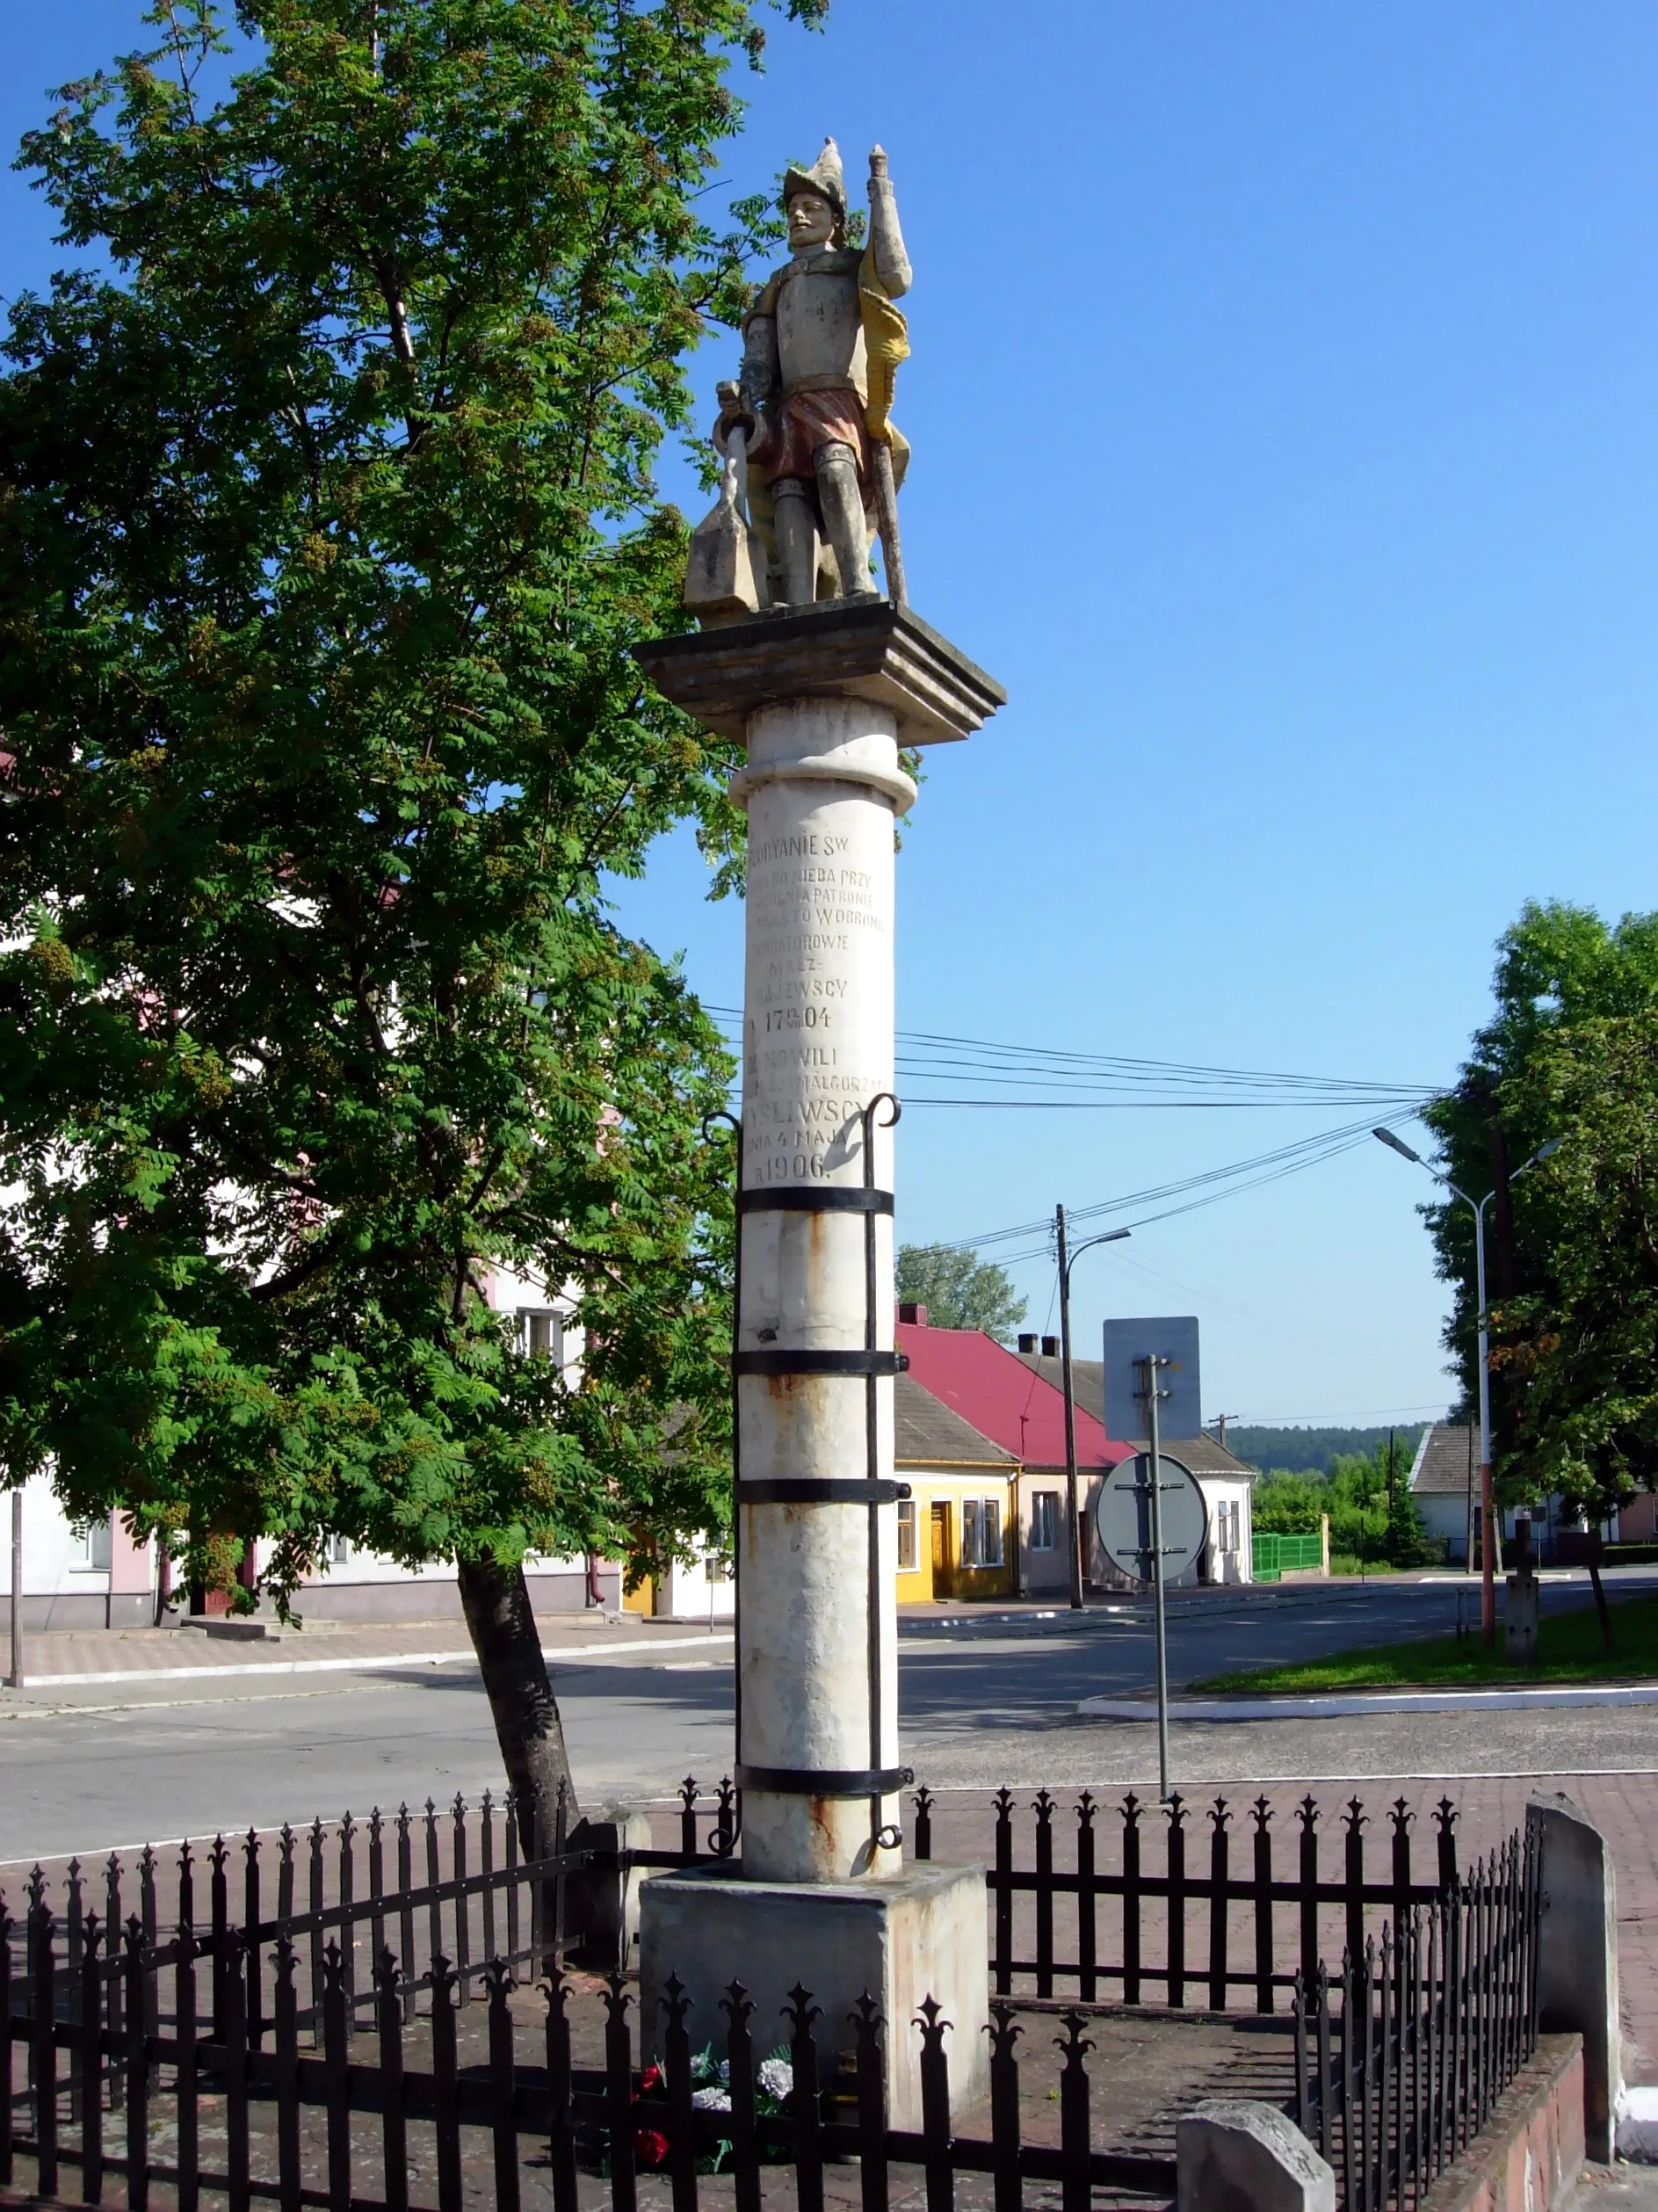 Photo showing: Statue of St. Florian on Market Square in Ćmielów, Poland